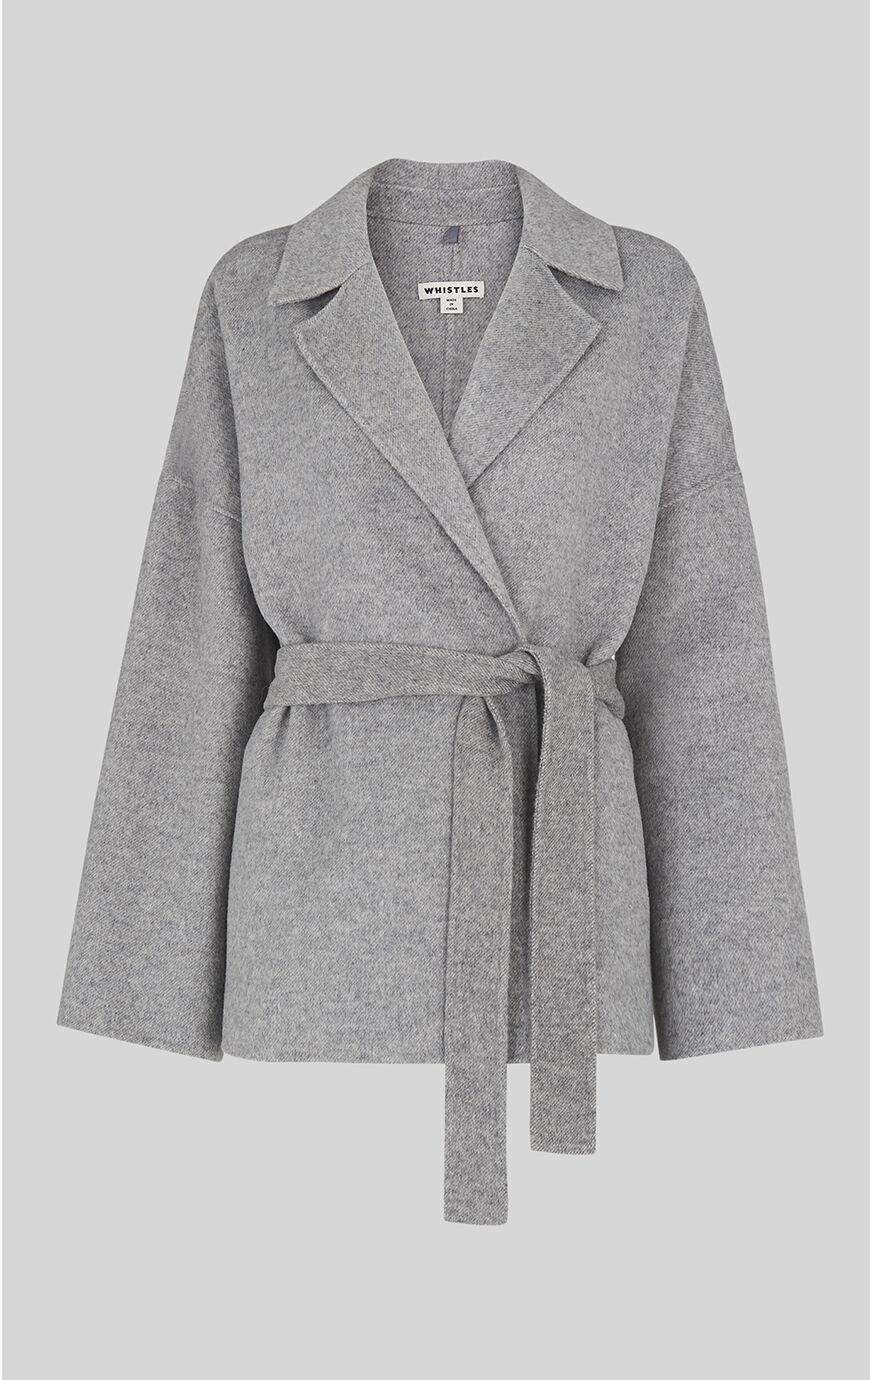 snor wol Corrupt Whistles Belted Short Wrap Coat in Gray | Lyst